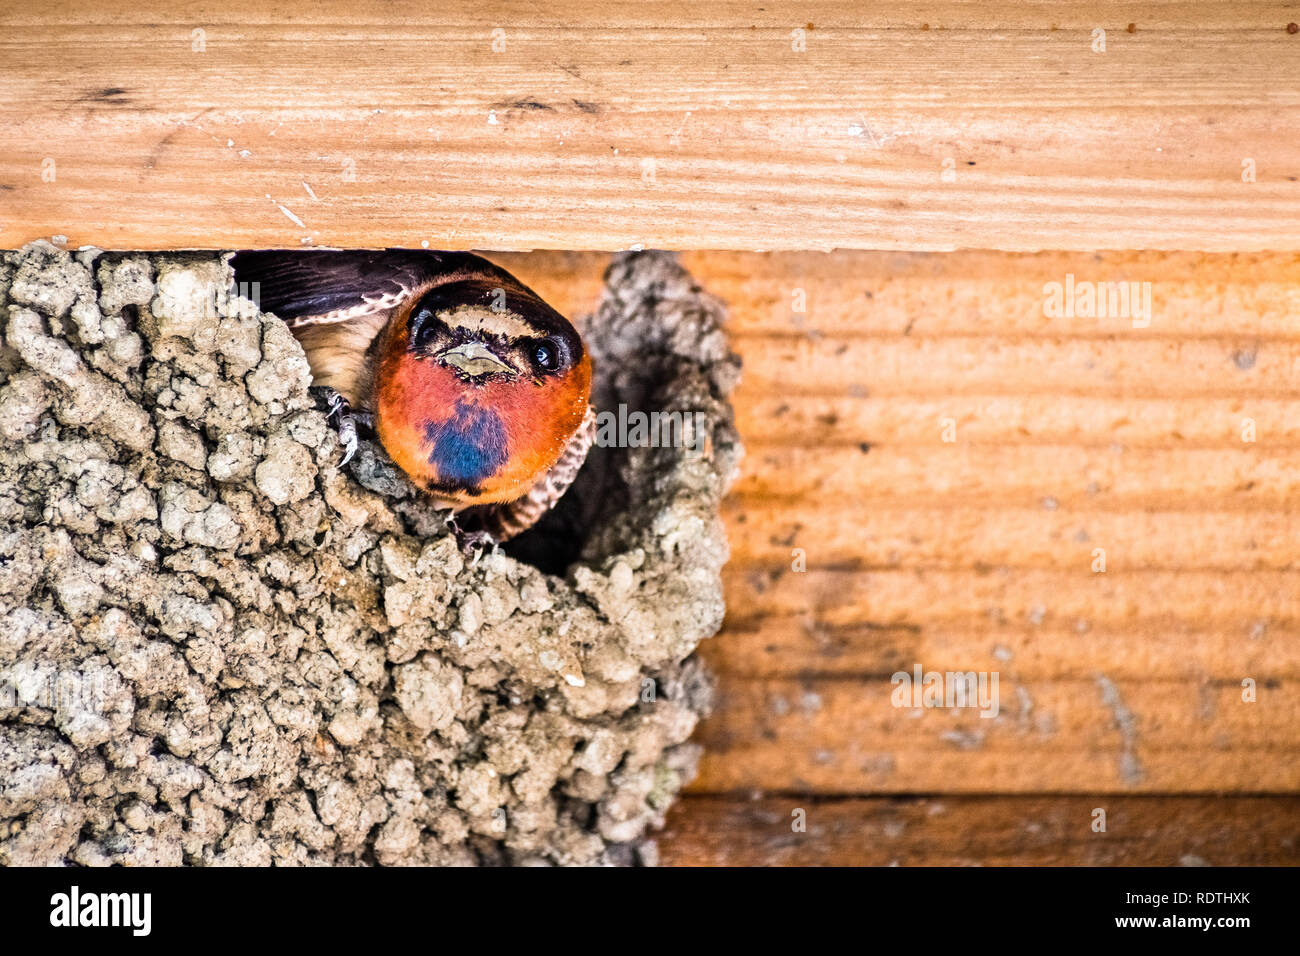 Cliff swallow (Petrochelidon pyrrhonota) trying to build a nest on a wooden ledge, in the spring time, San Francisco bay area, California Stock Photo